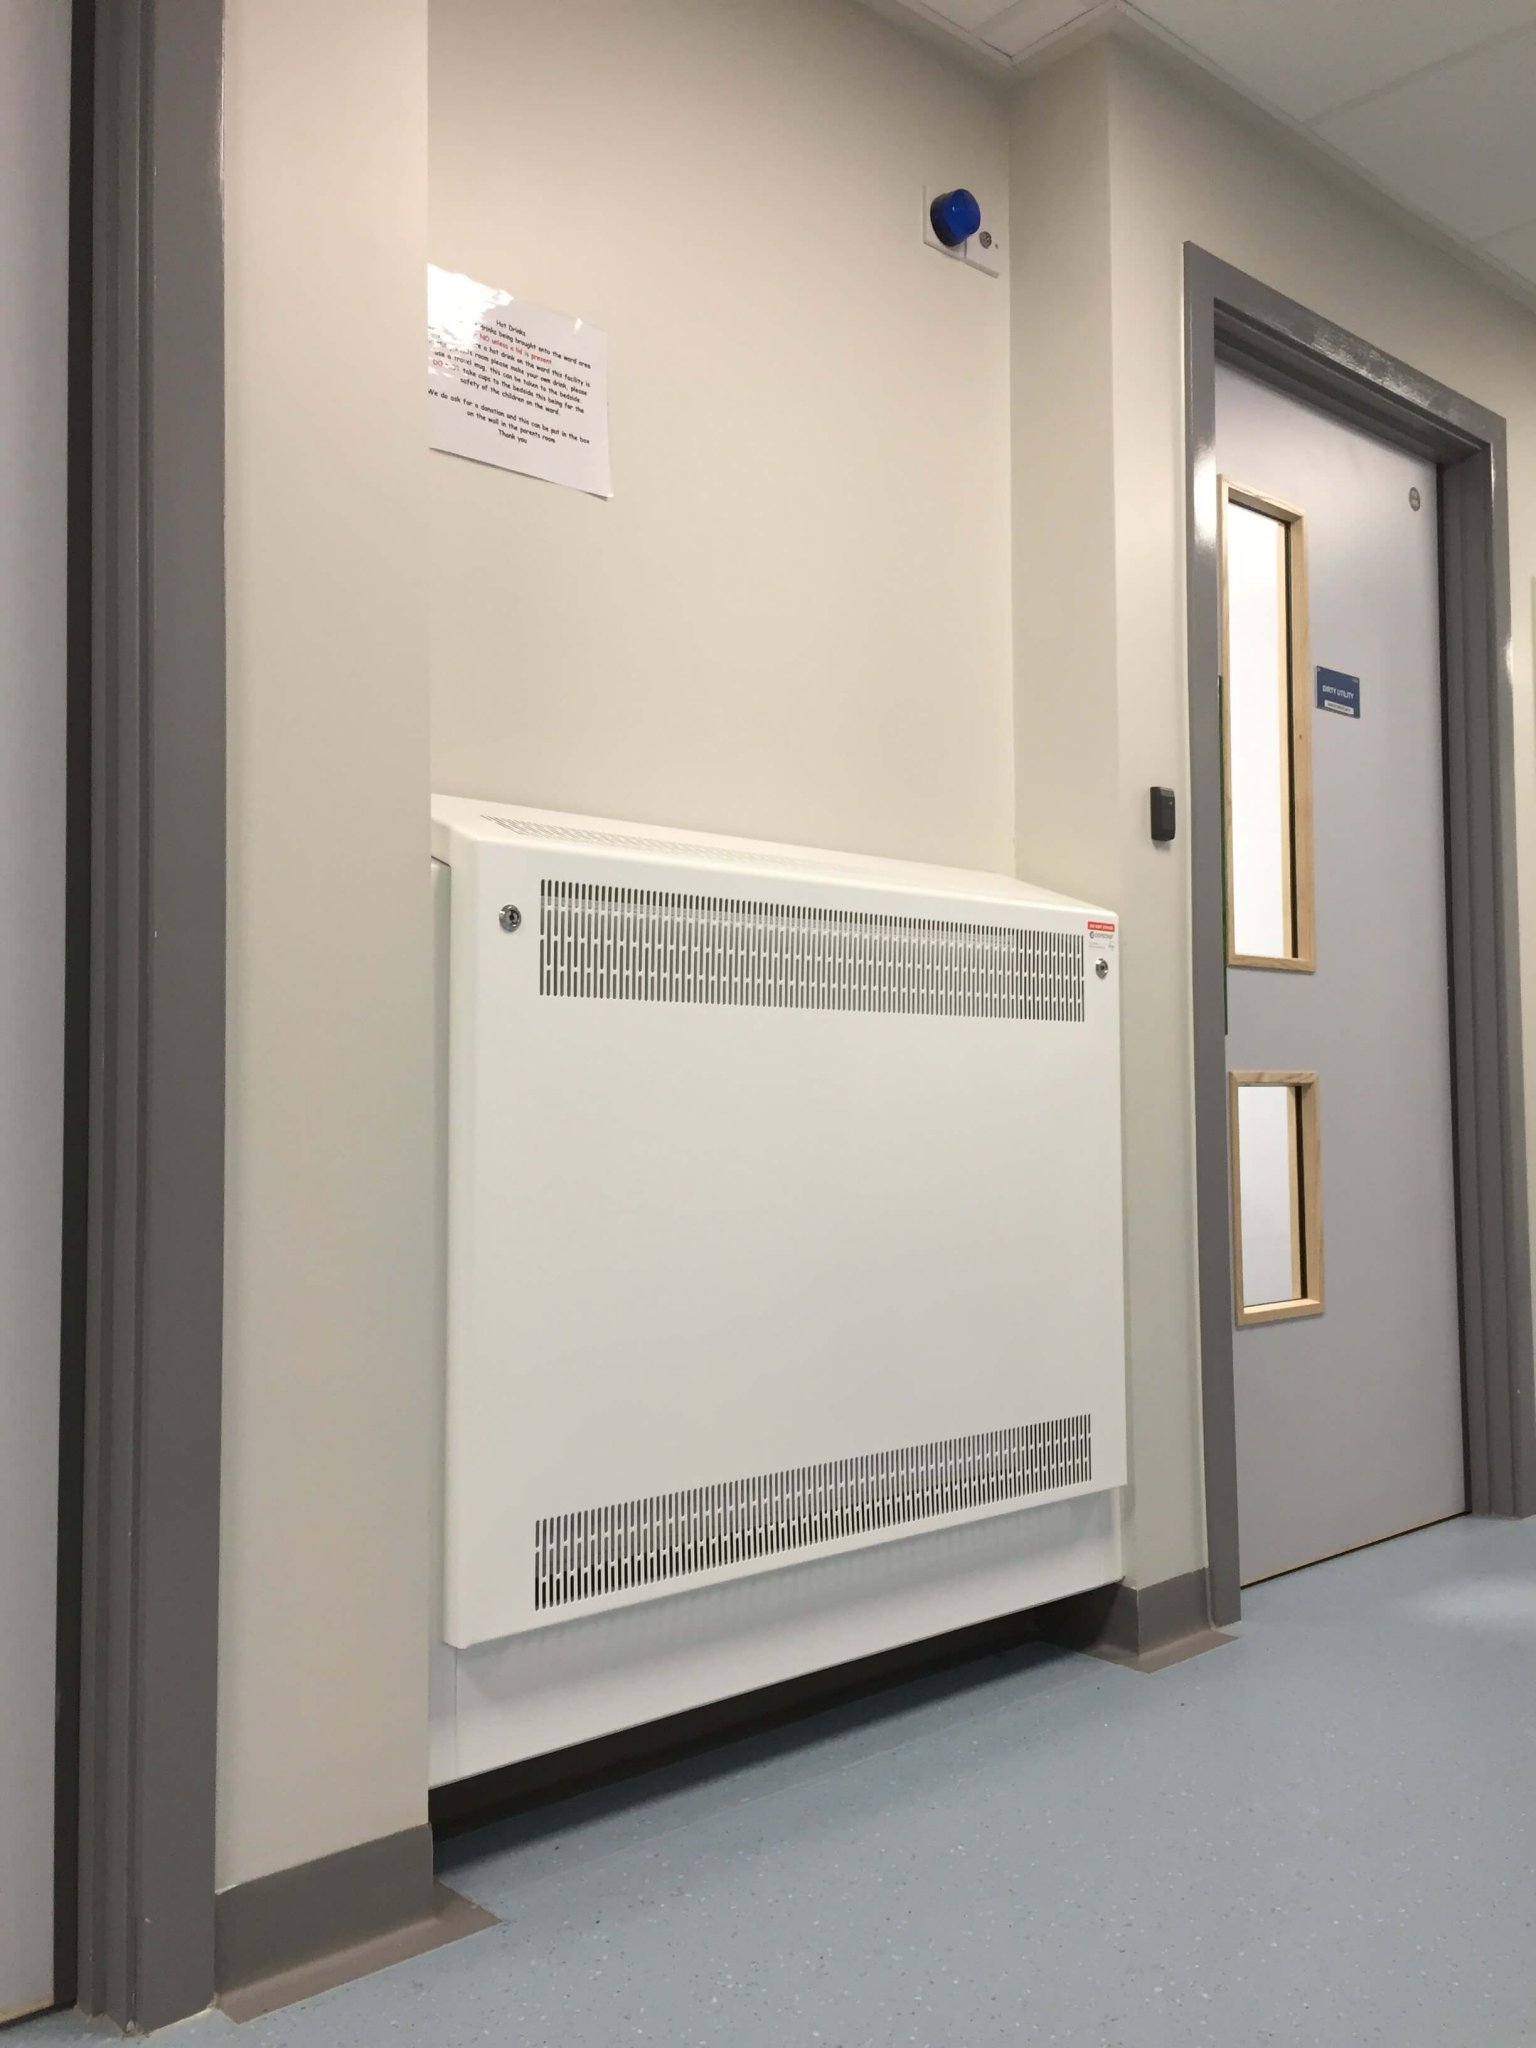 metal-radiator-guards-in-hospitals-schools-care-homes-mental-health-contour-heating